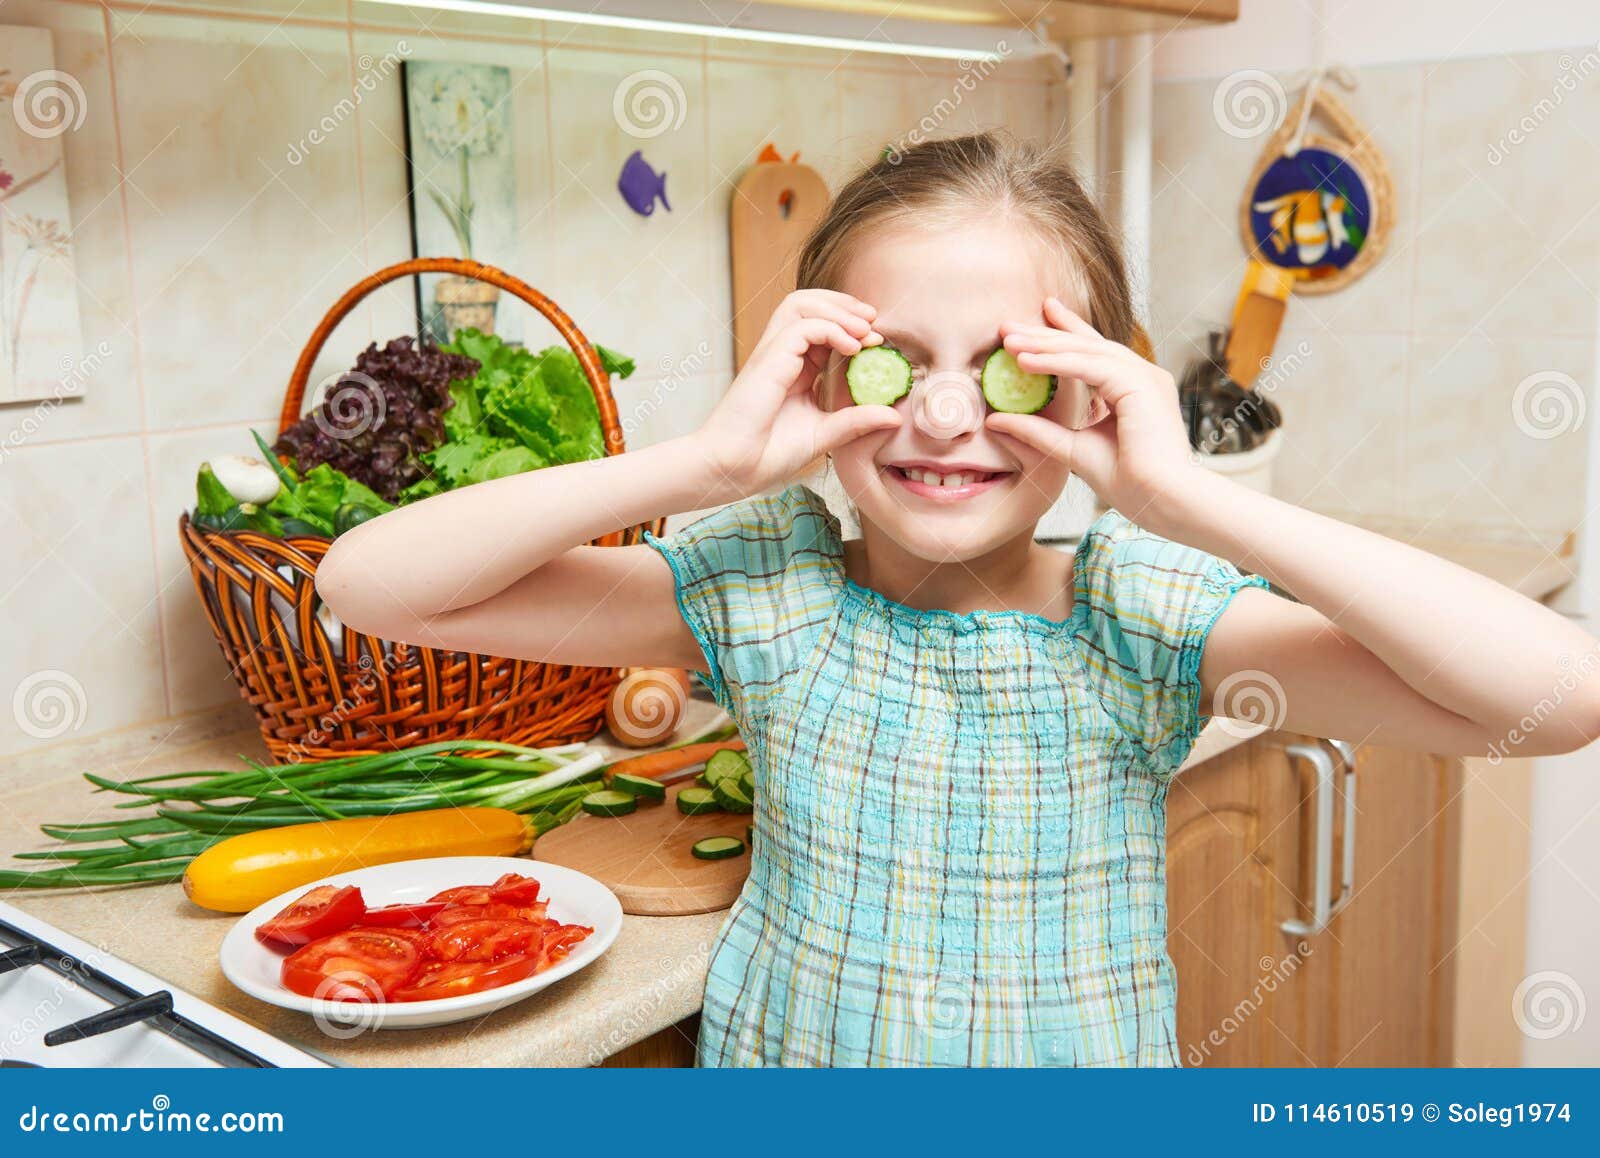 Girl Closes Her Eyes With Cucumbers And Have Fun In Home Kitchen Basket Of Vegetables And Fresh